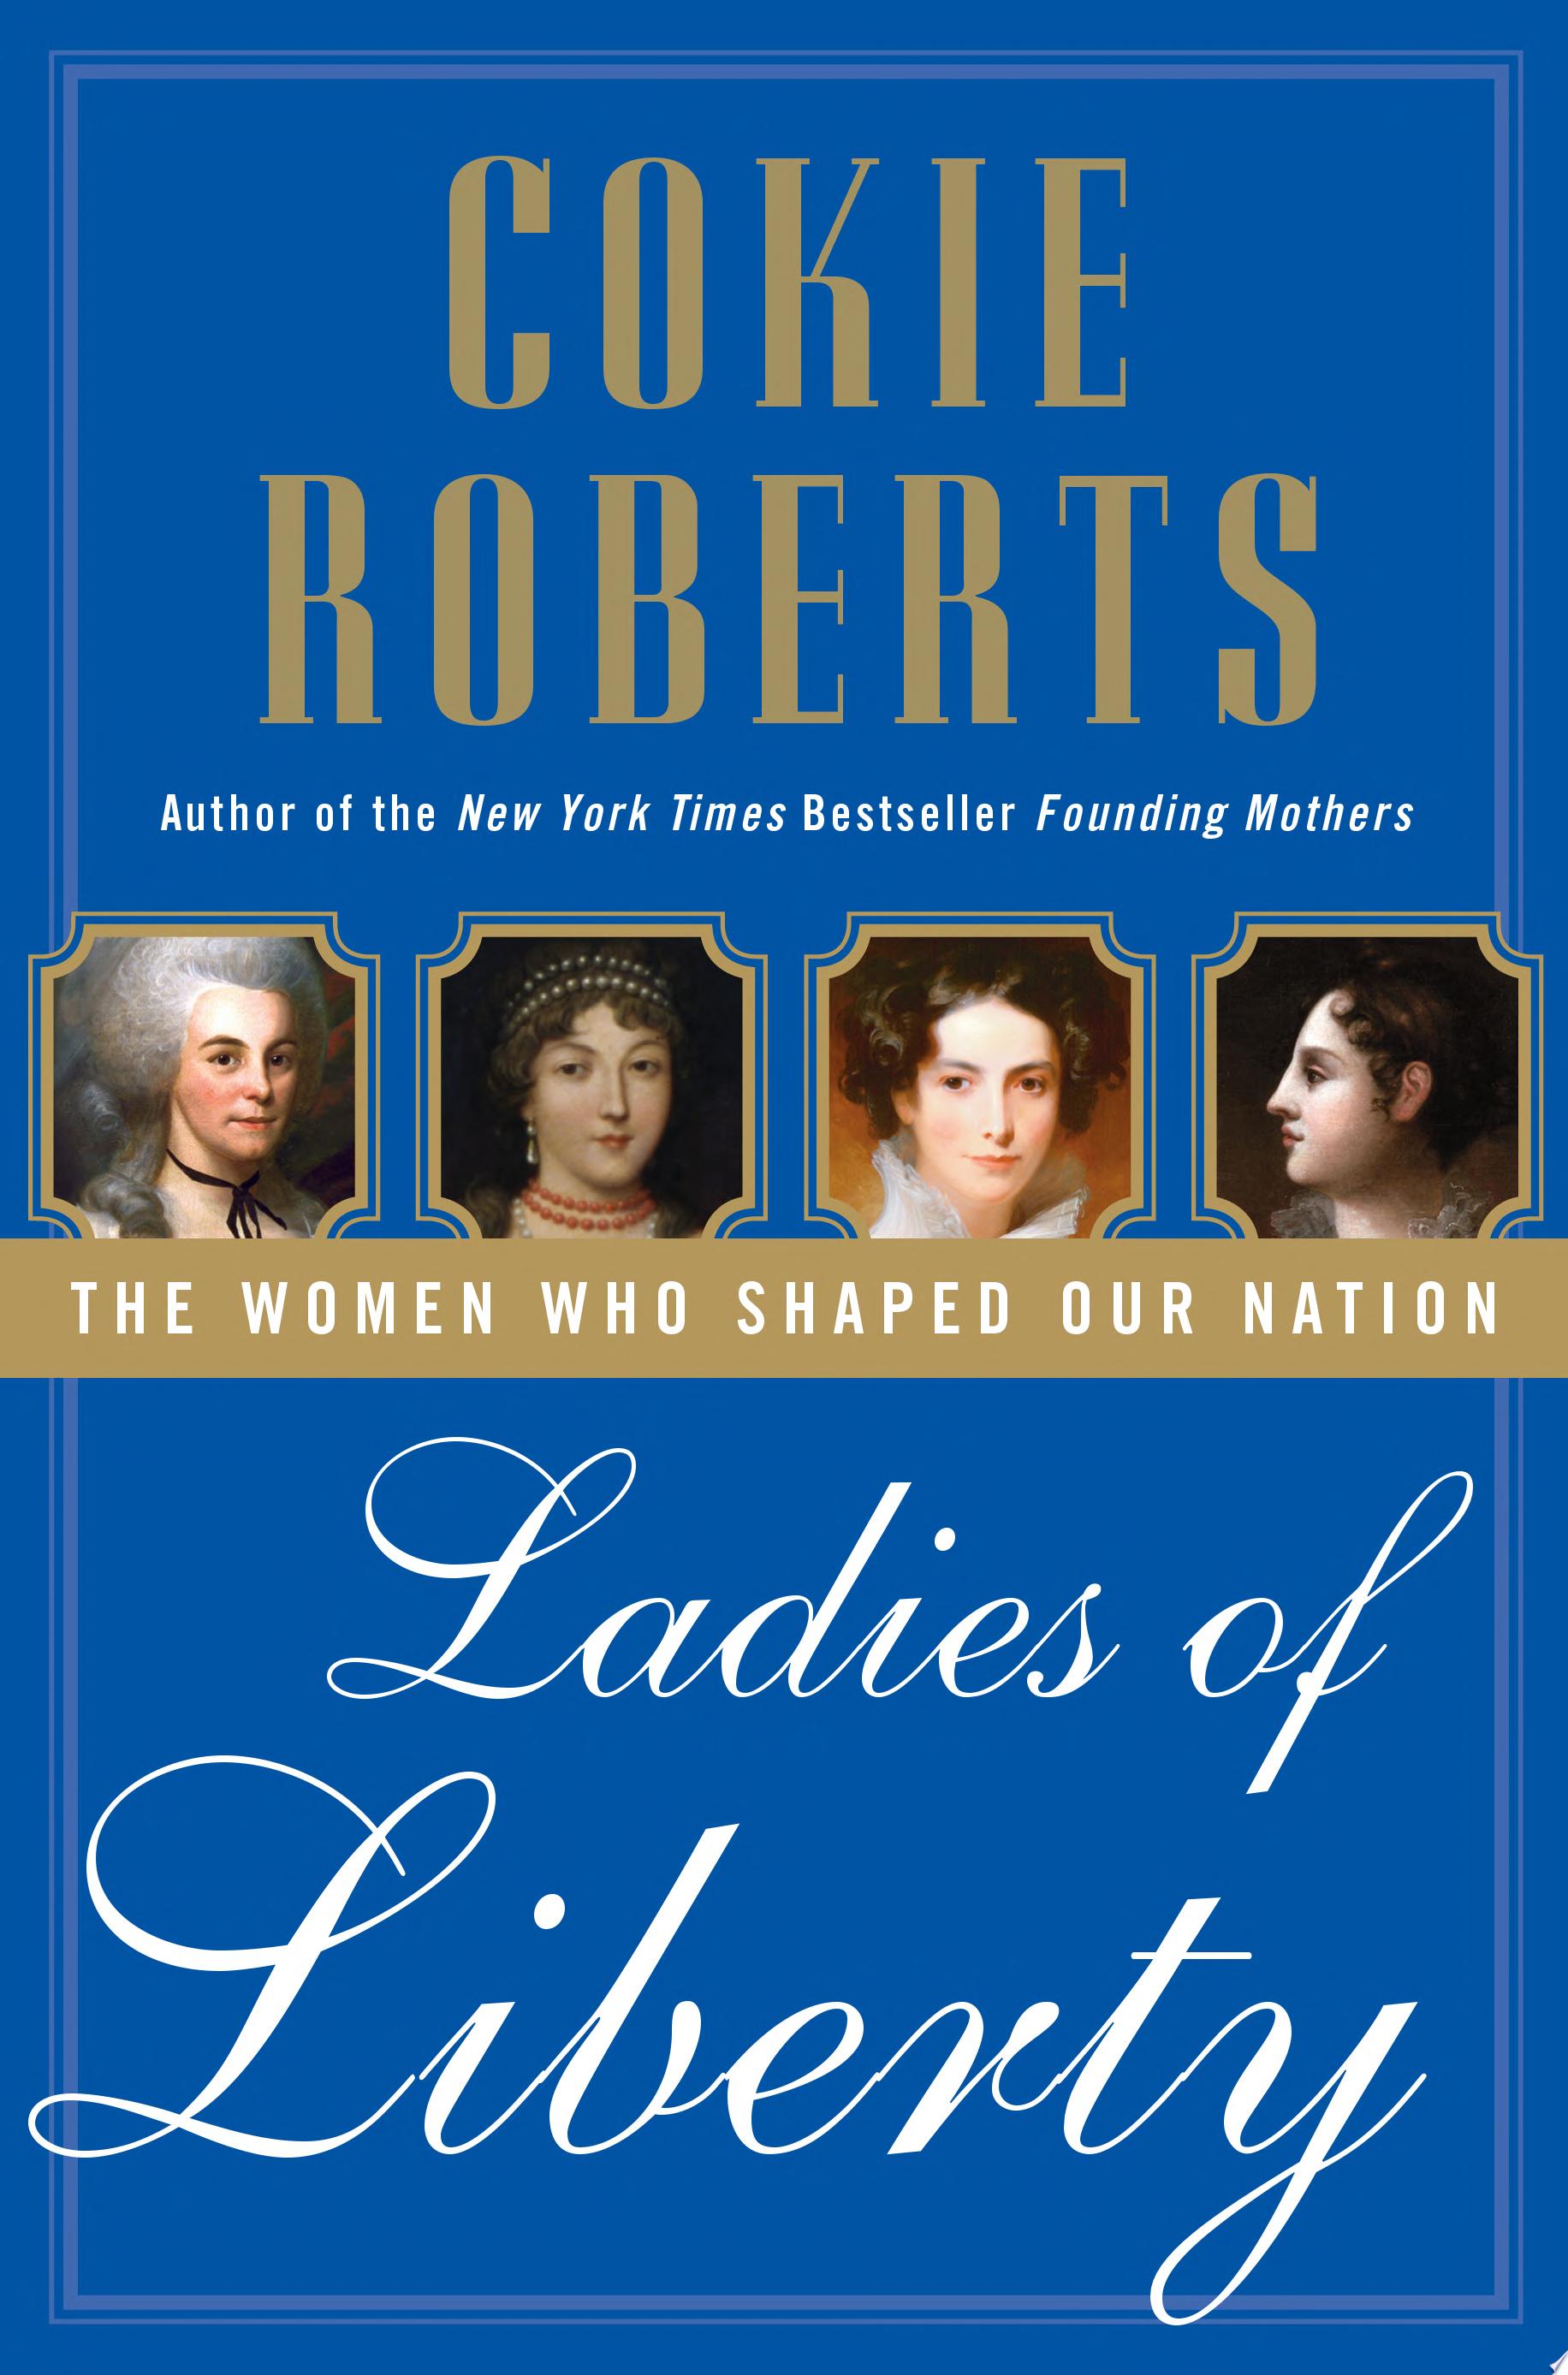 Image for "Ladies of Liberty"